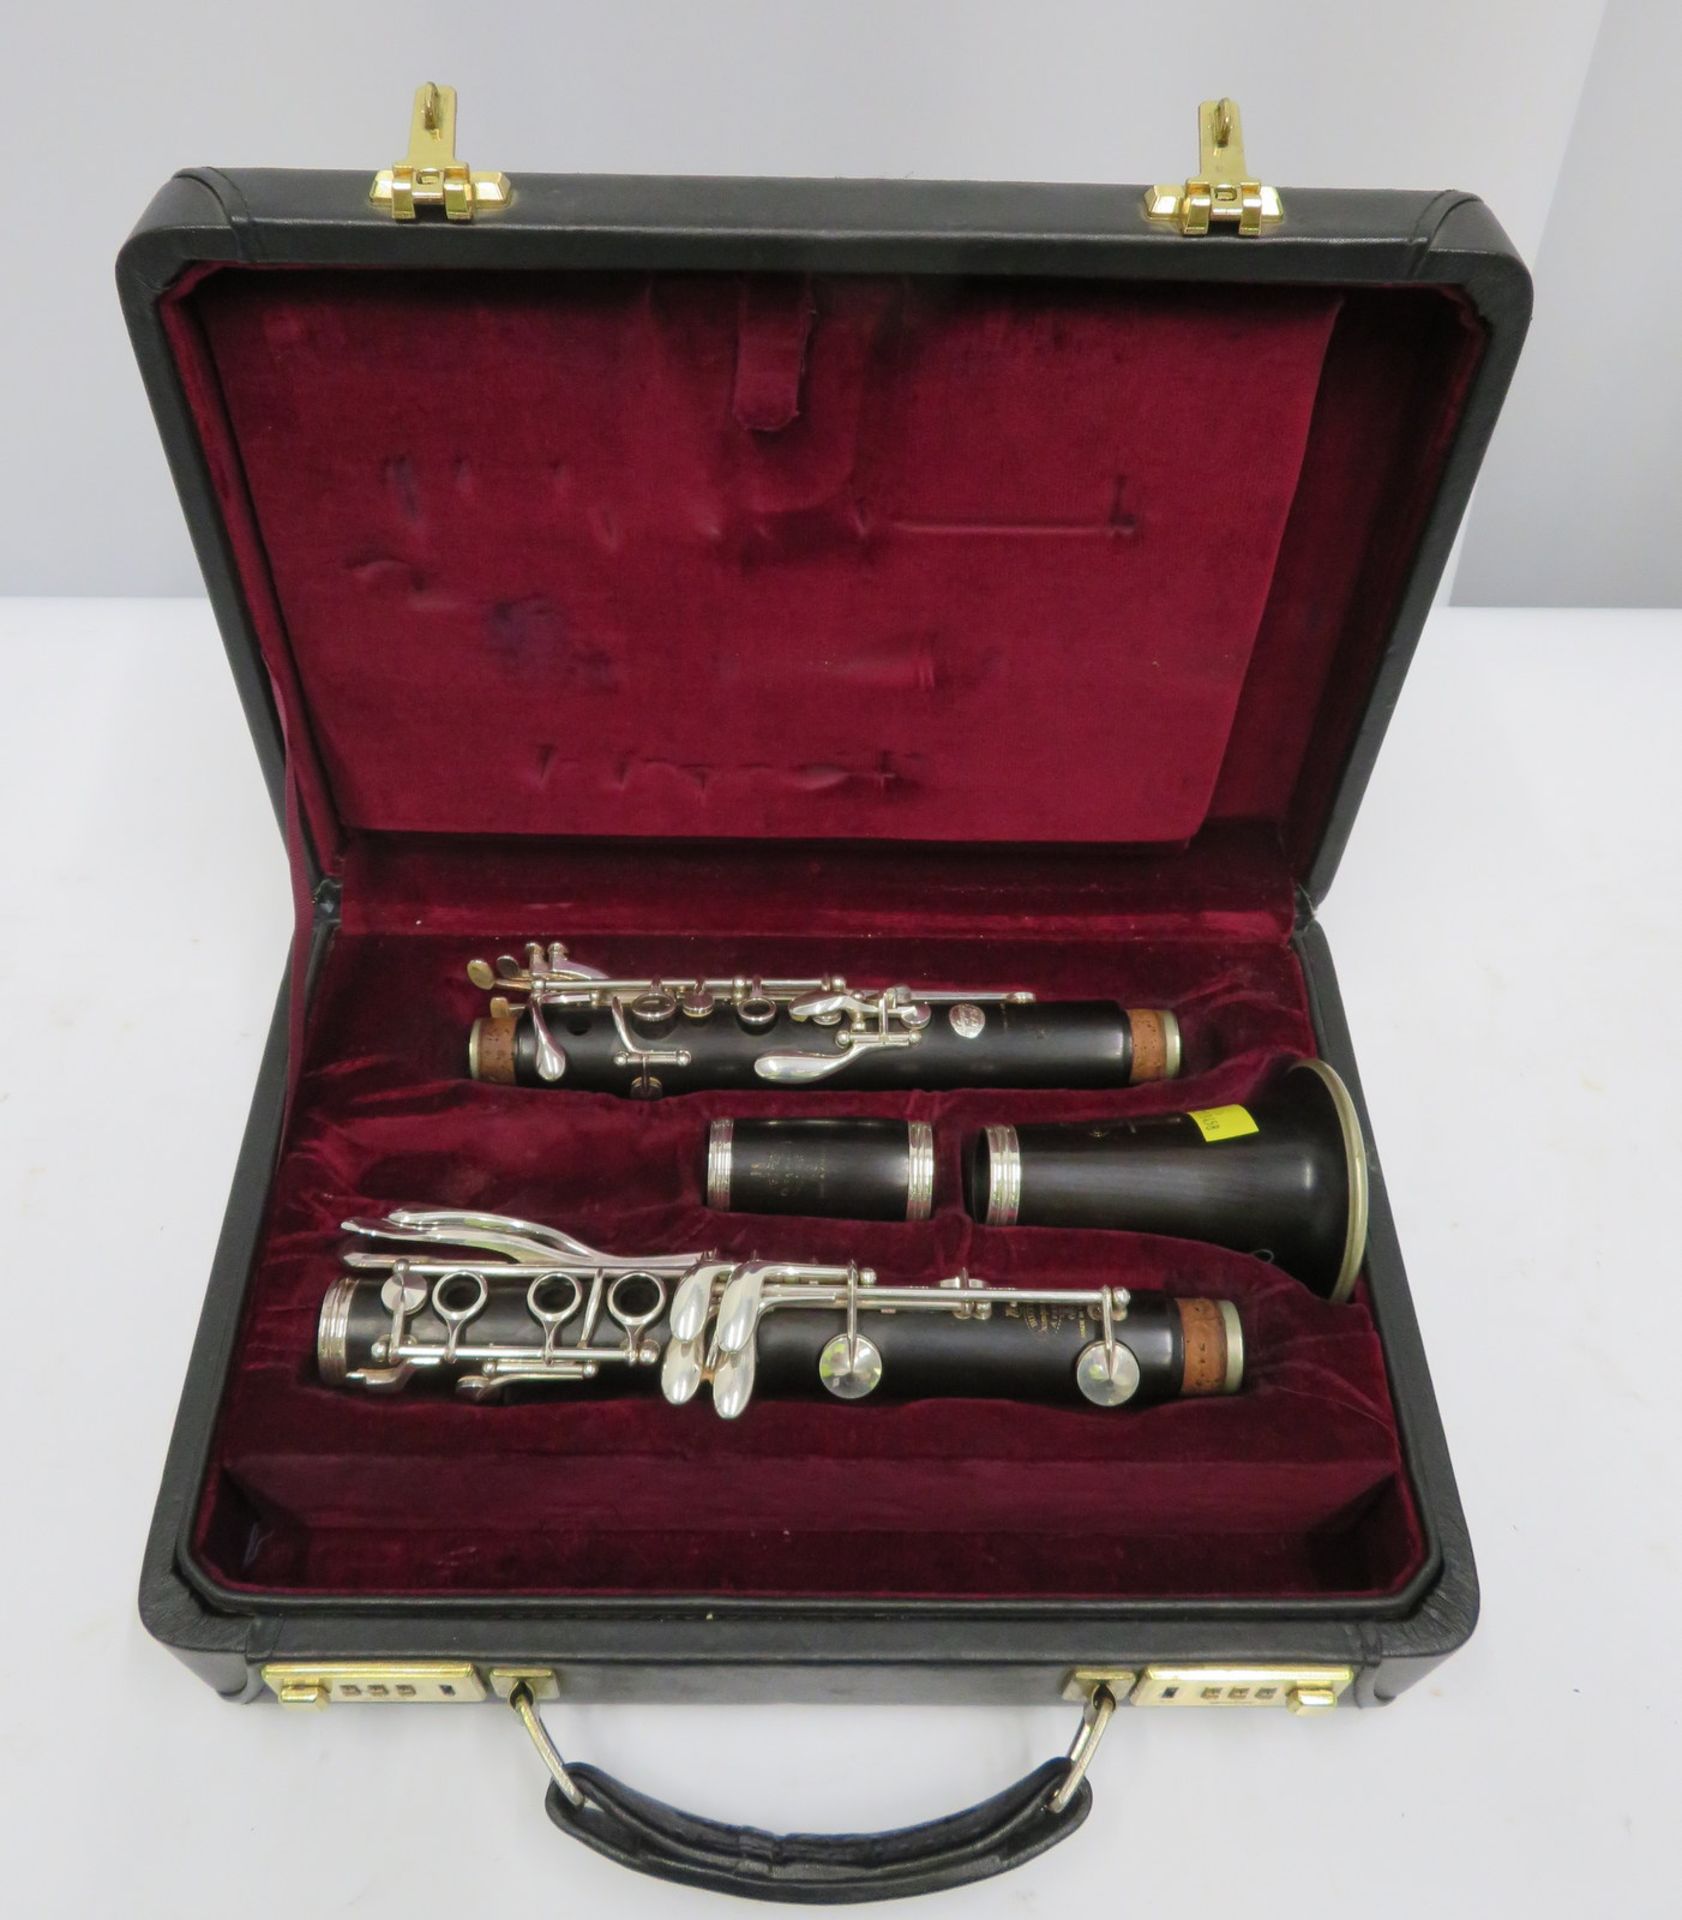 Buffet Crampon R13 Prestige clarinet with case. Serial number: 584774.